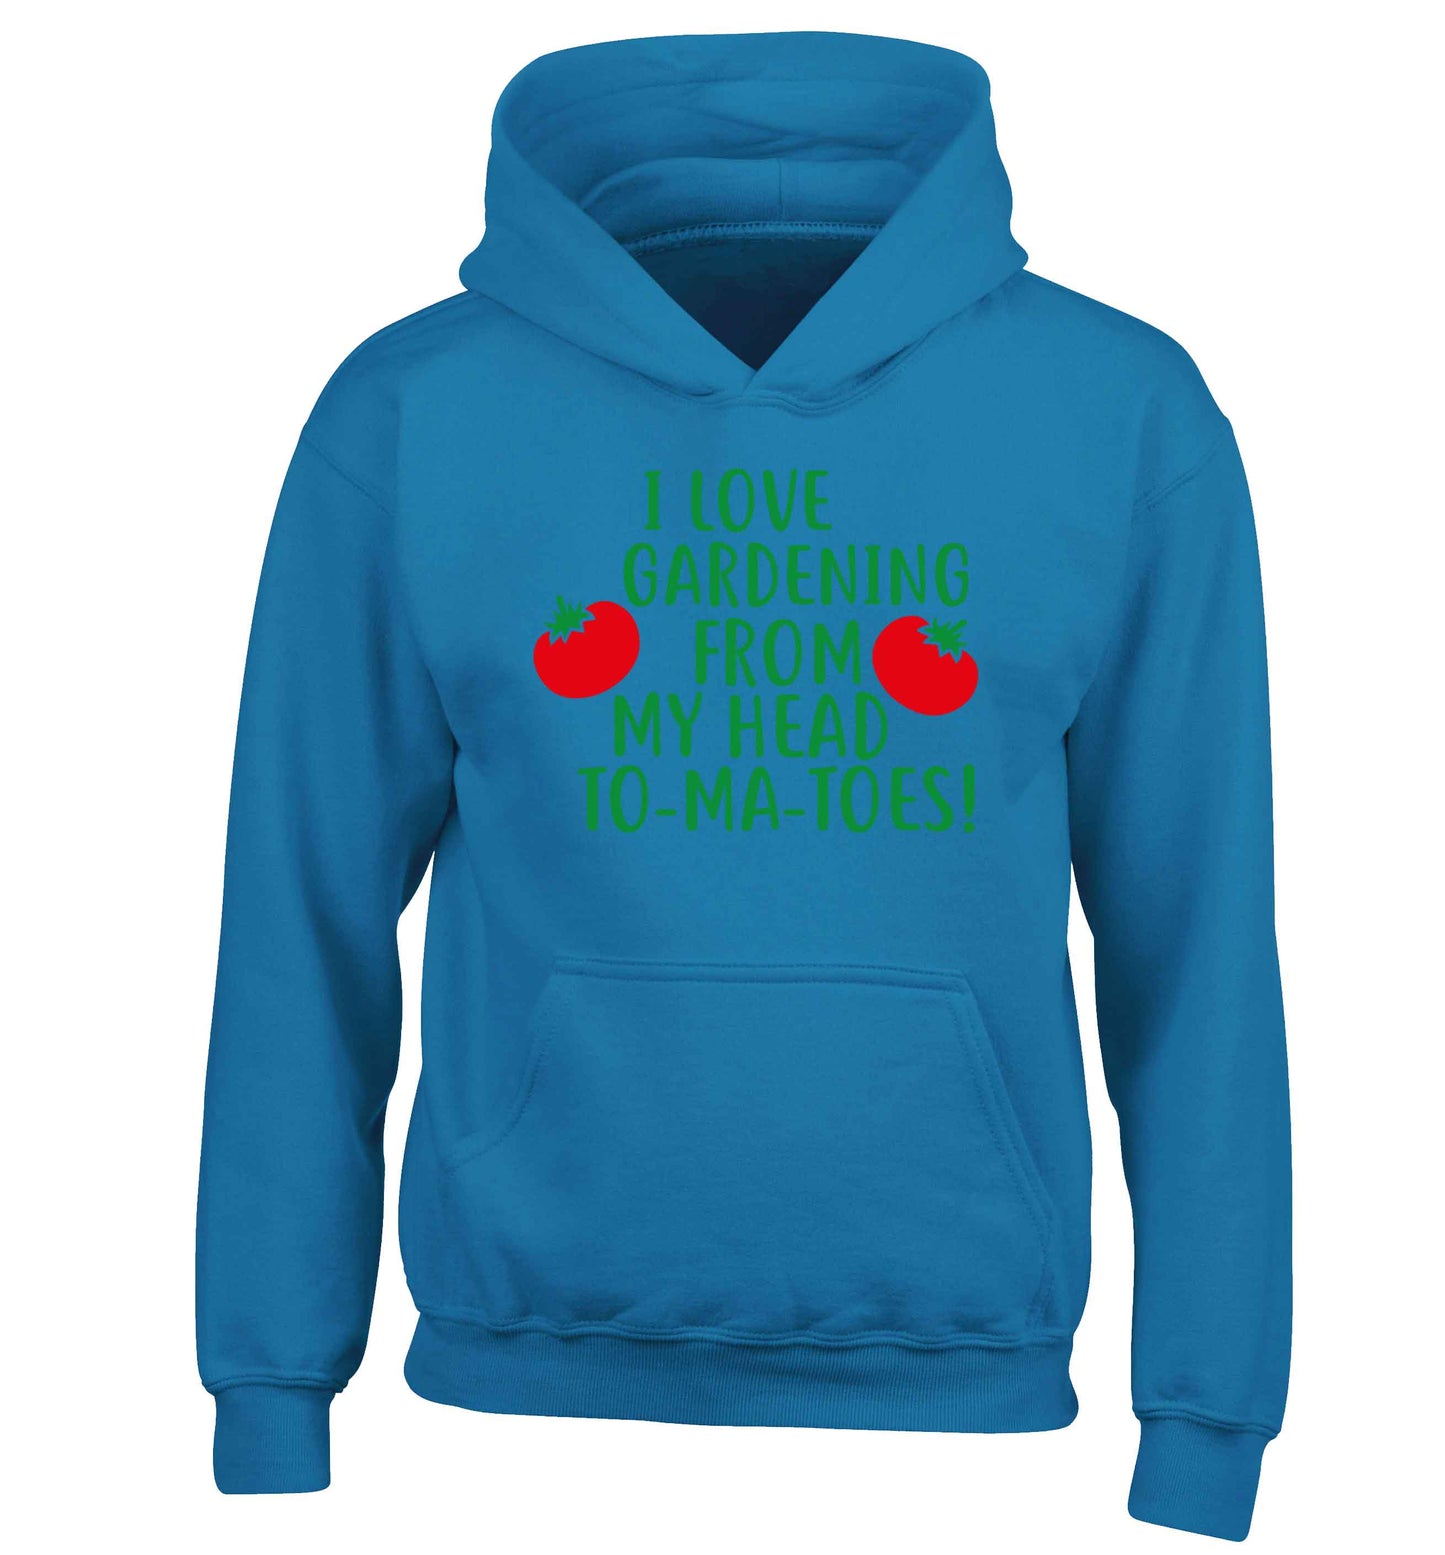 I love gardening from my head to-ma-toes children's blue hoodie 12-13 Years